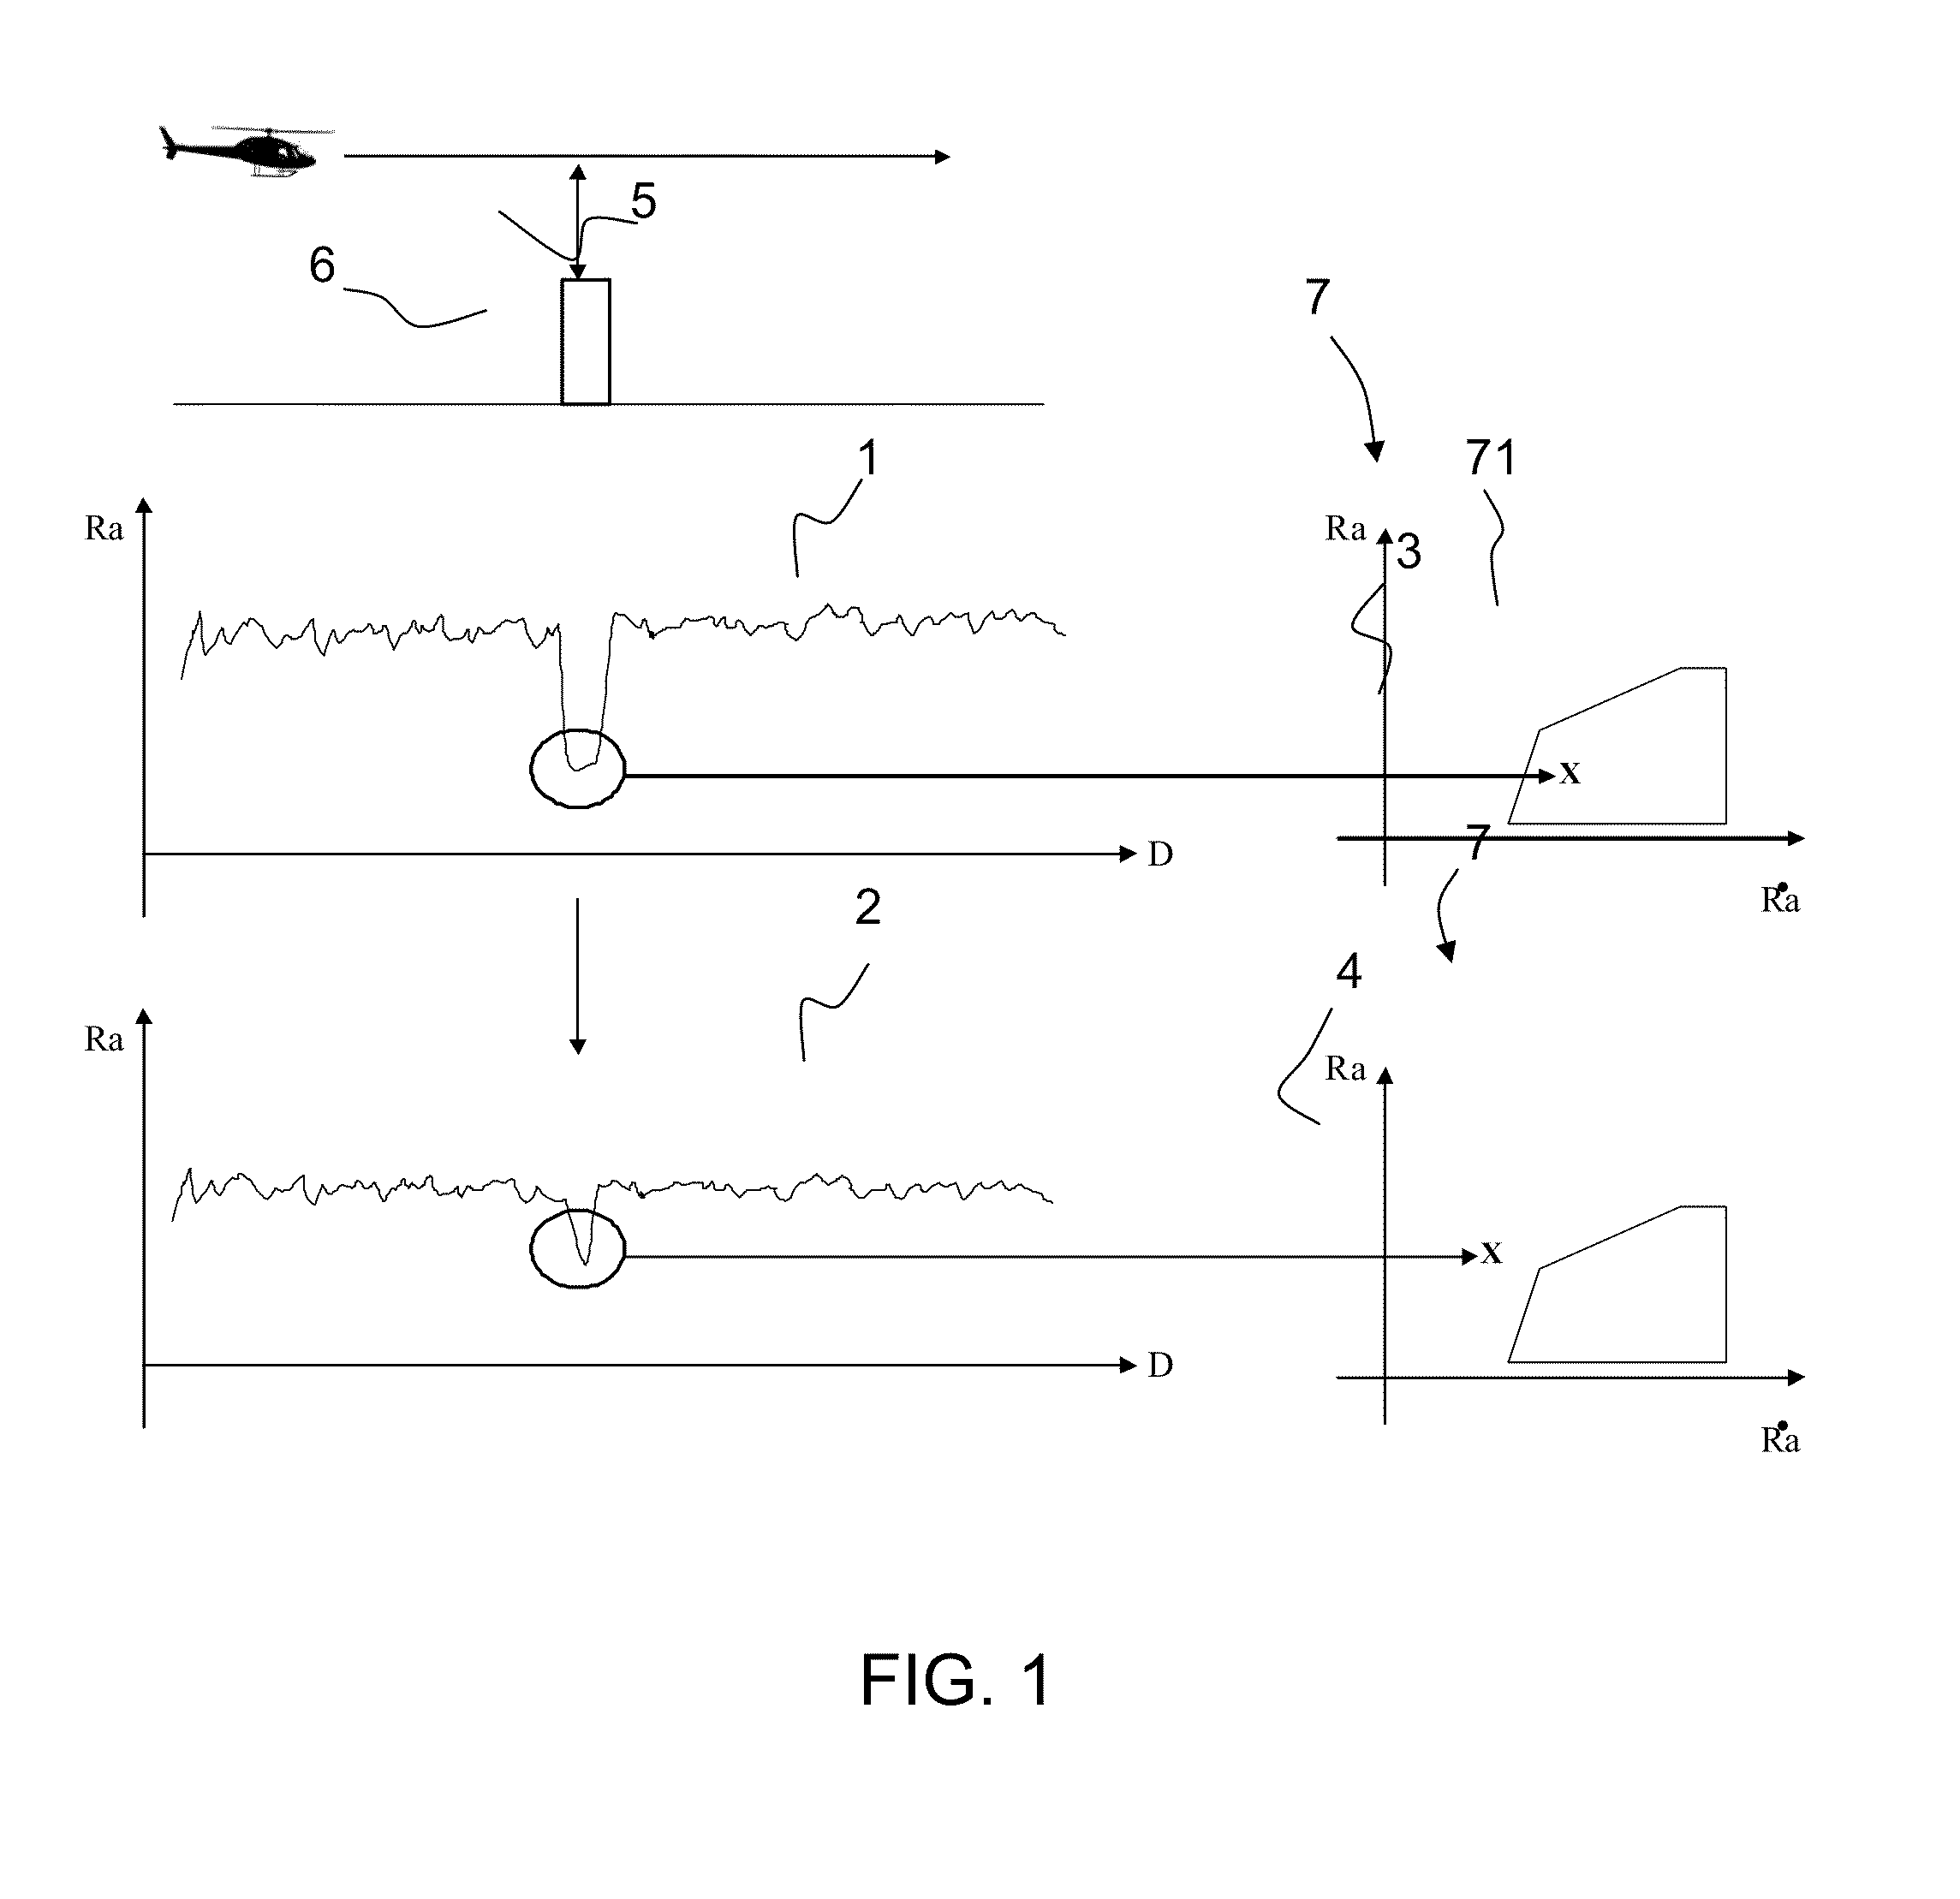 Method of alert calculation for an aircraft ground proximity warning system